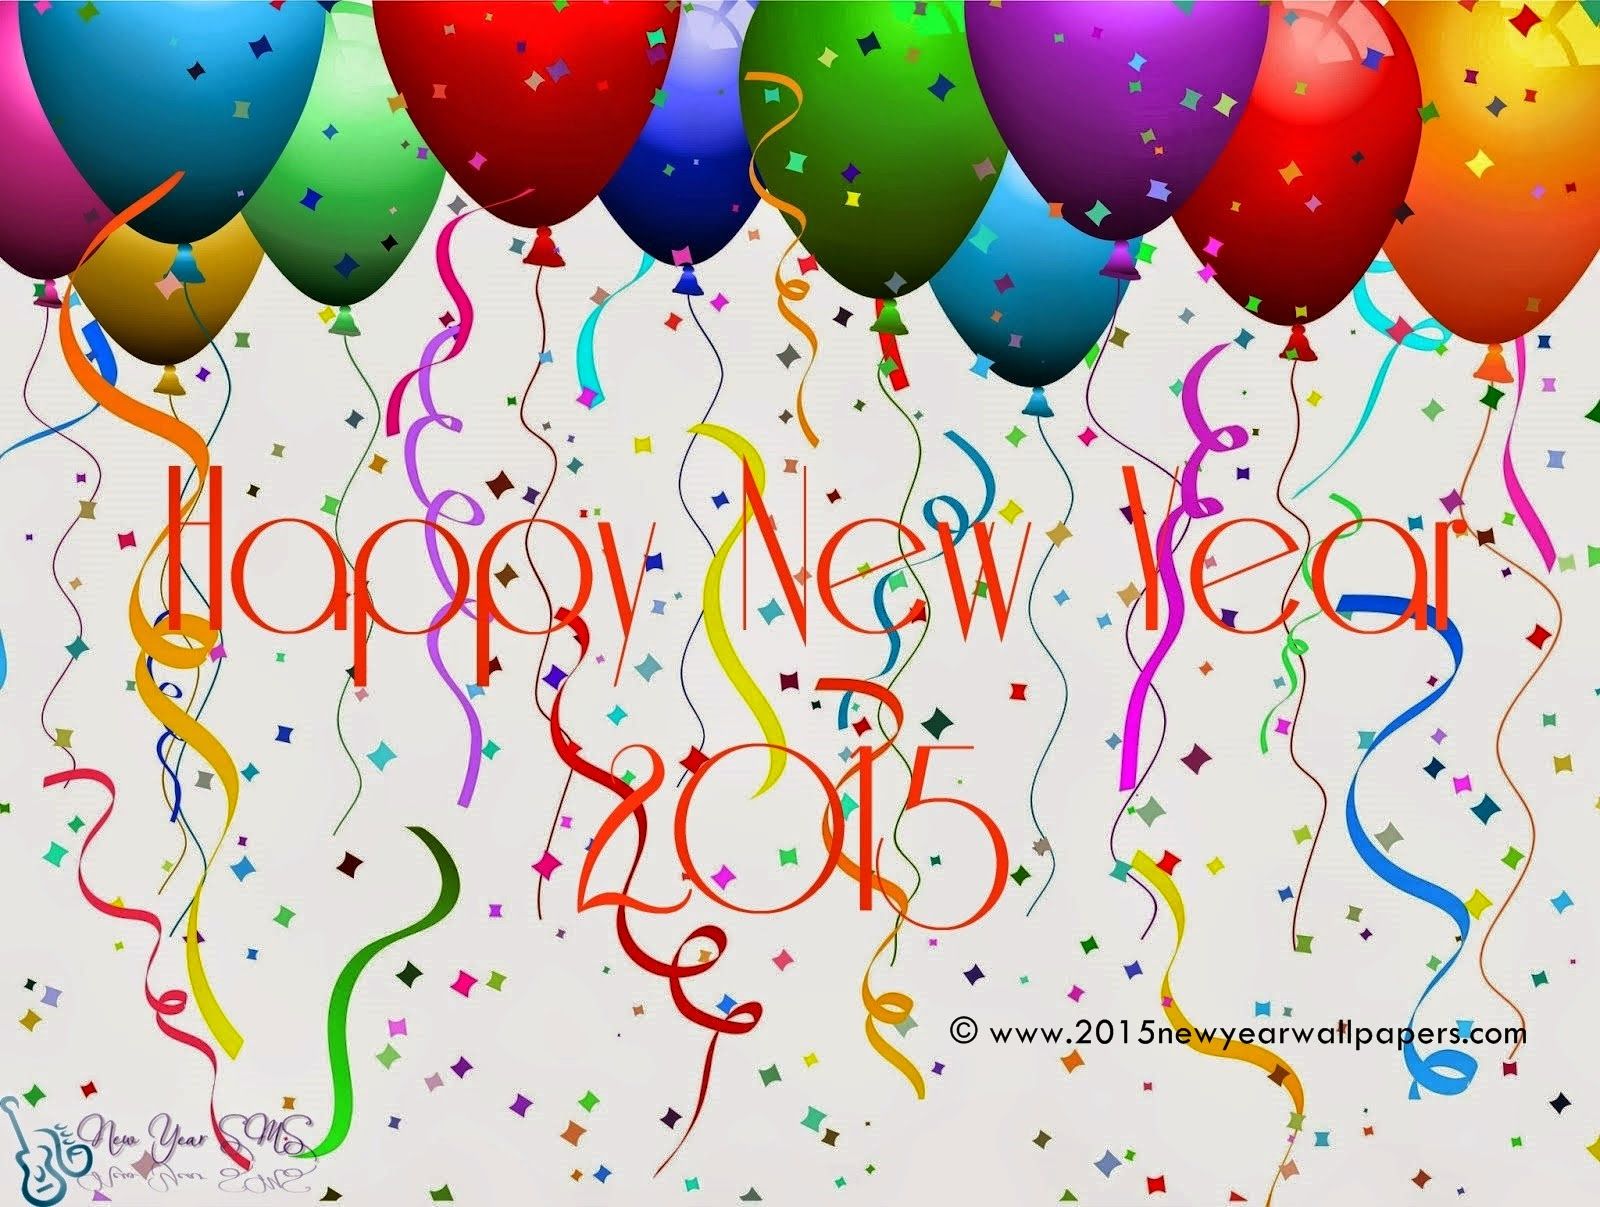 Happy New Year Wallpapers 2016 HD Free Download - 2016 new year